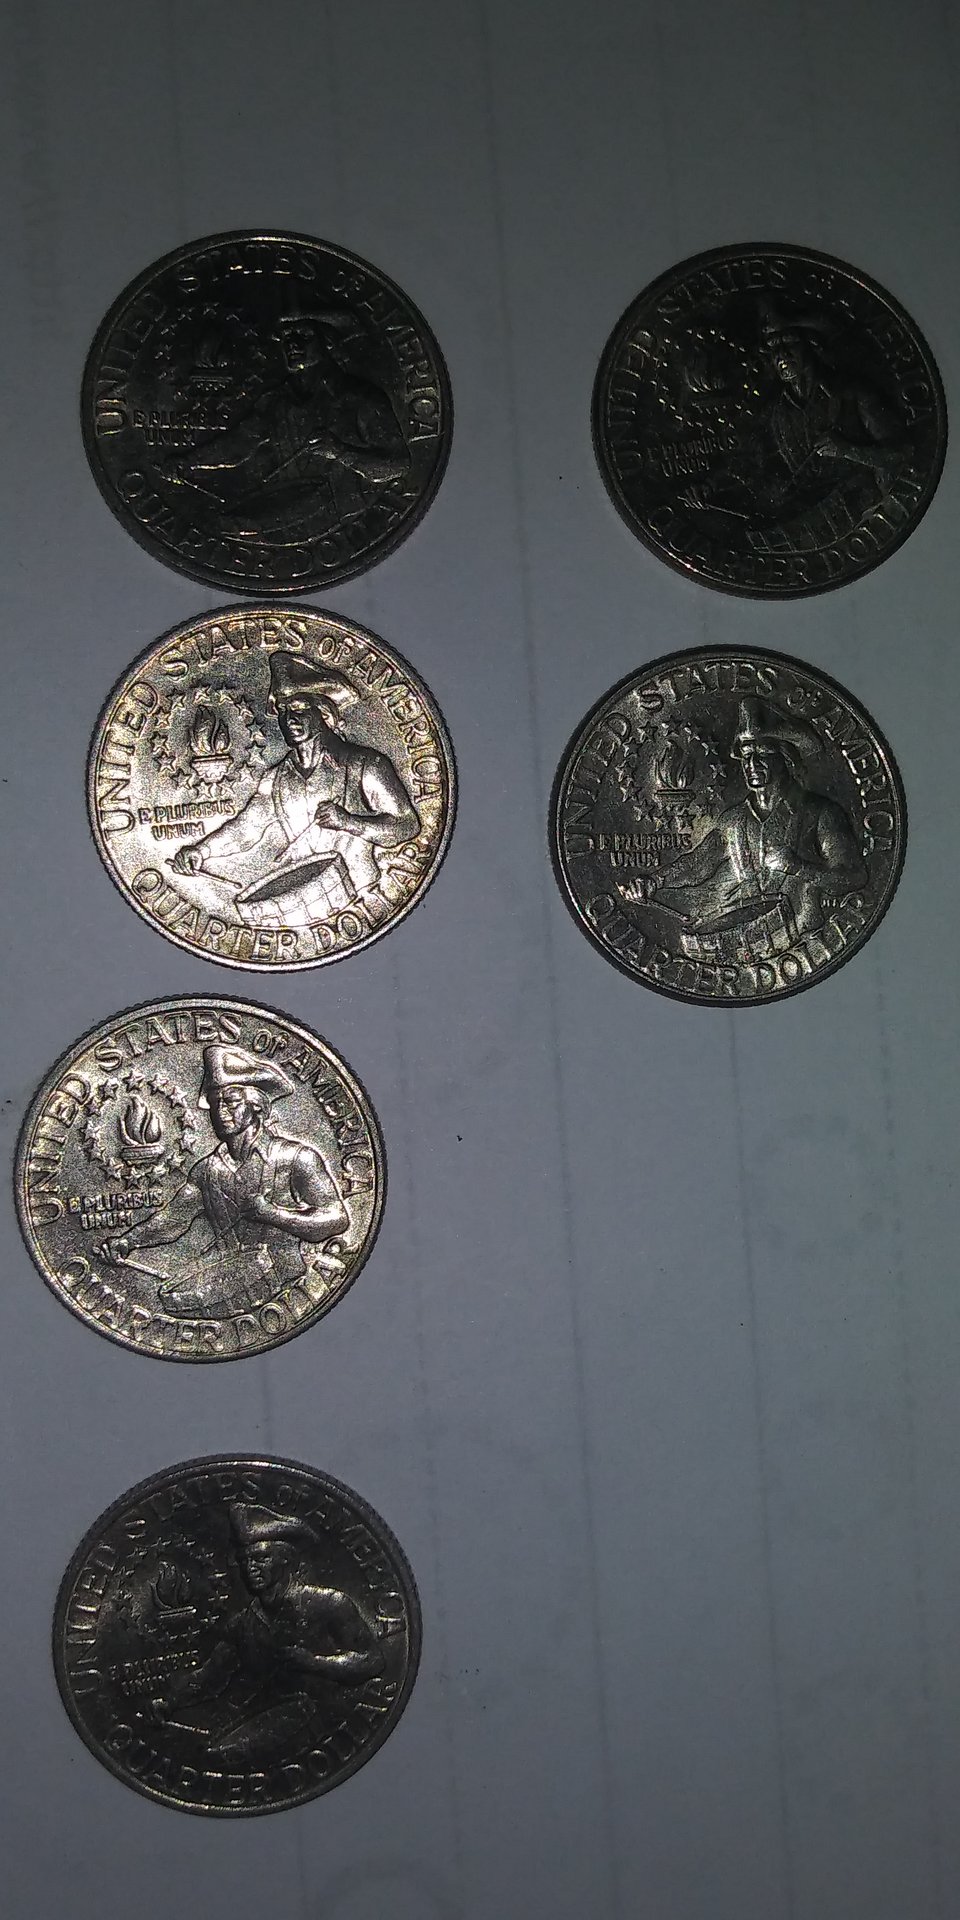 Is There a Safe Way to Clean Coins?